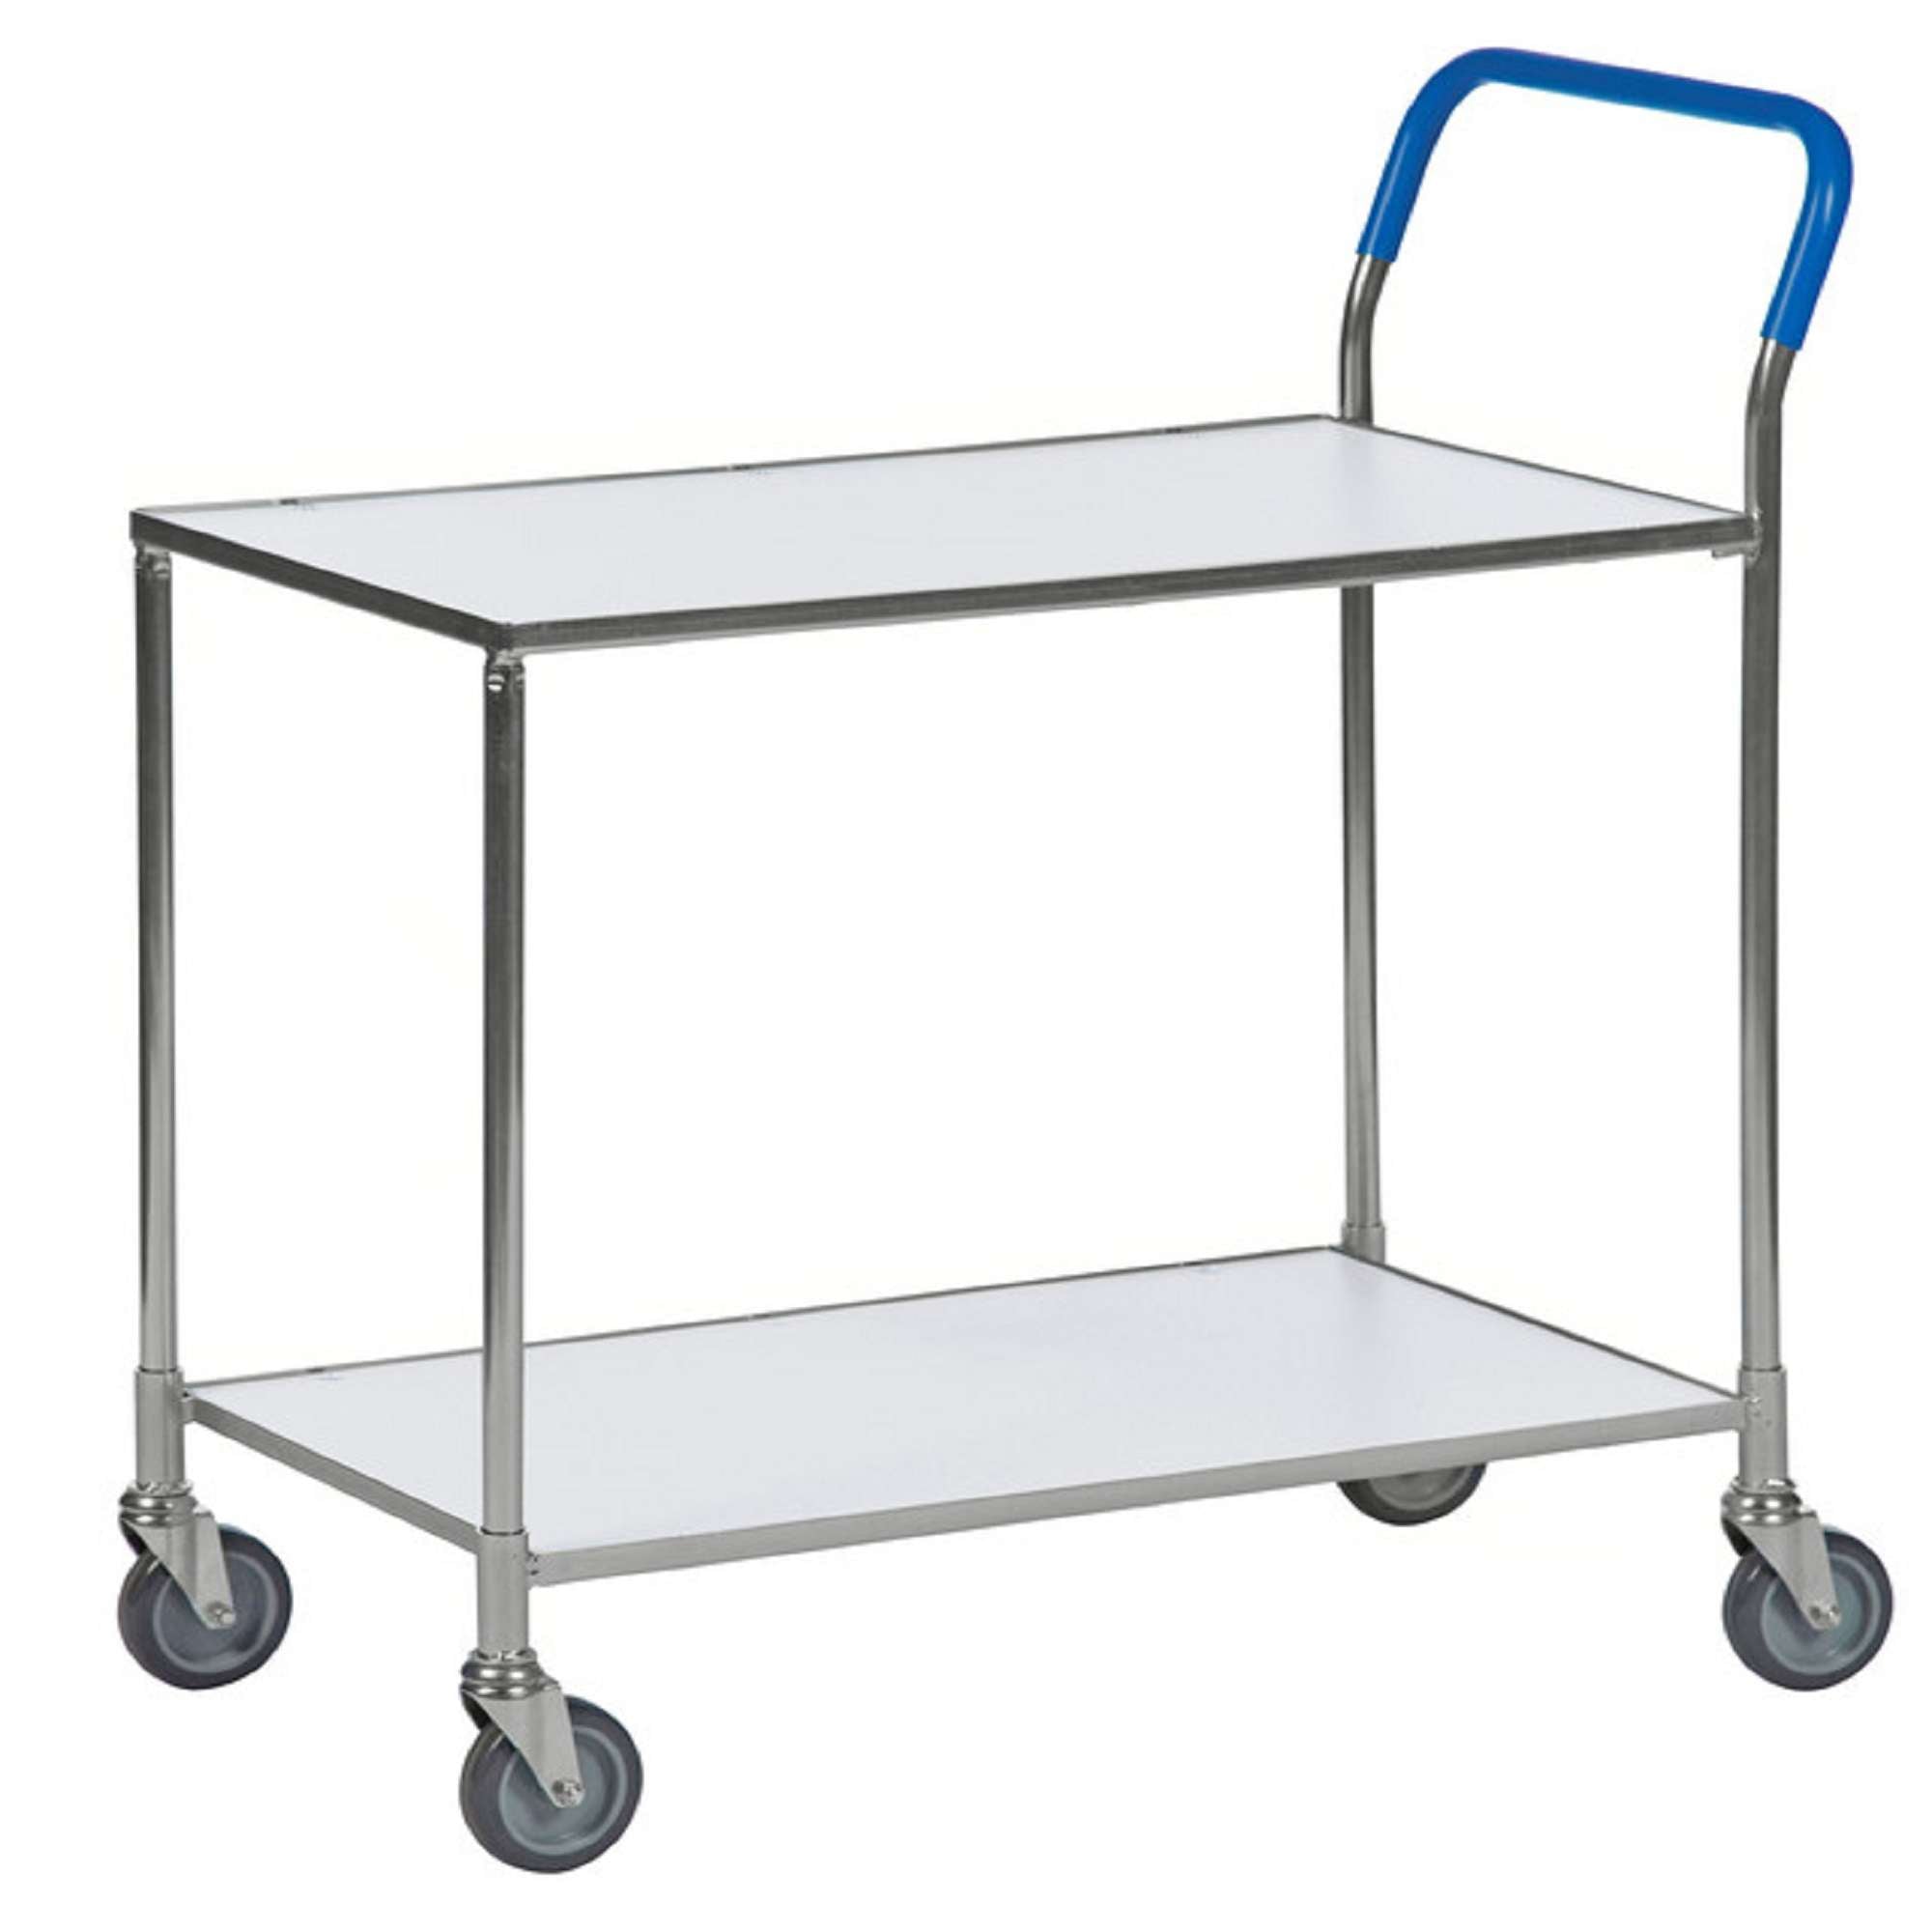 White / Electro galvanised Table trolley with 2 shelves, LxWxH (mm) 850x435x950